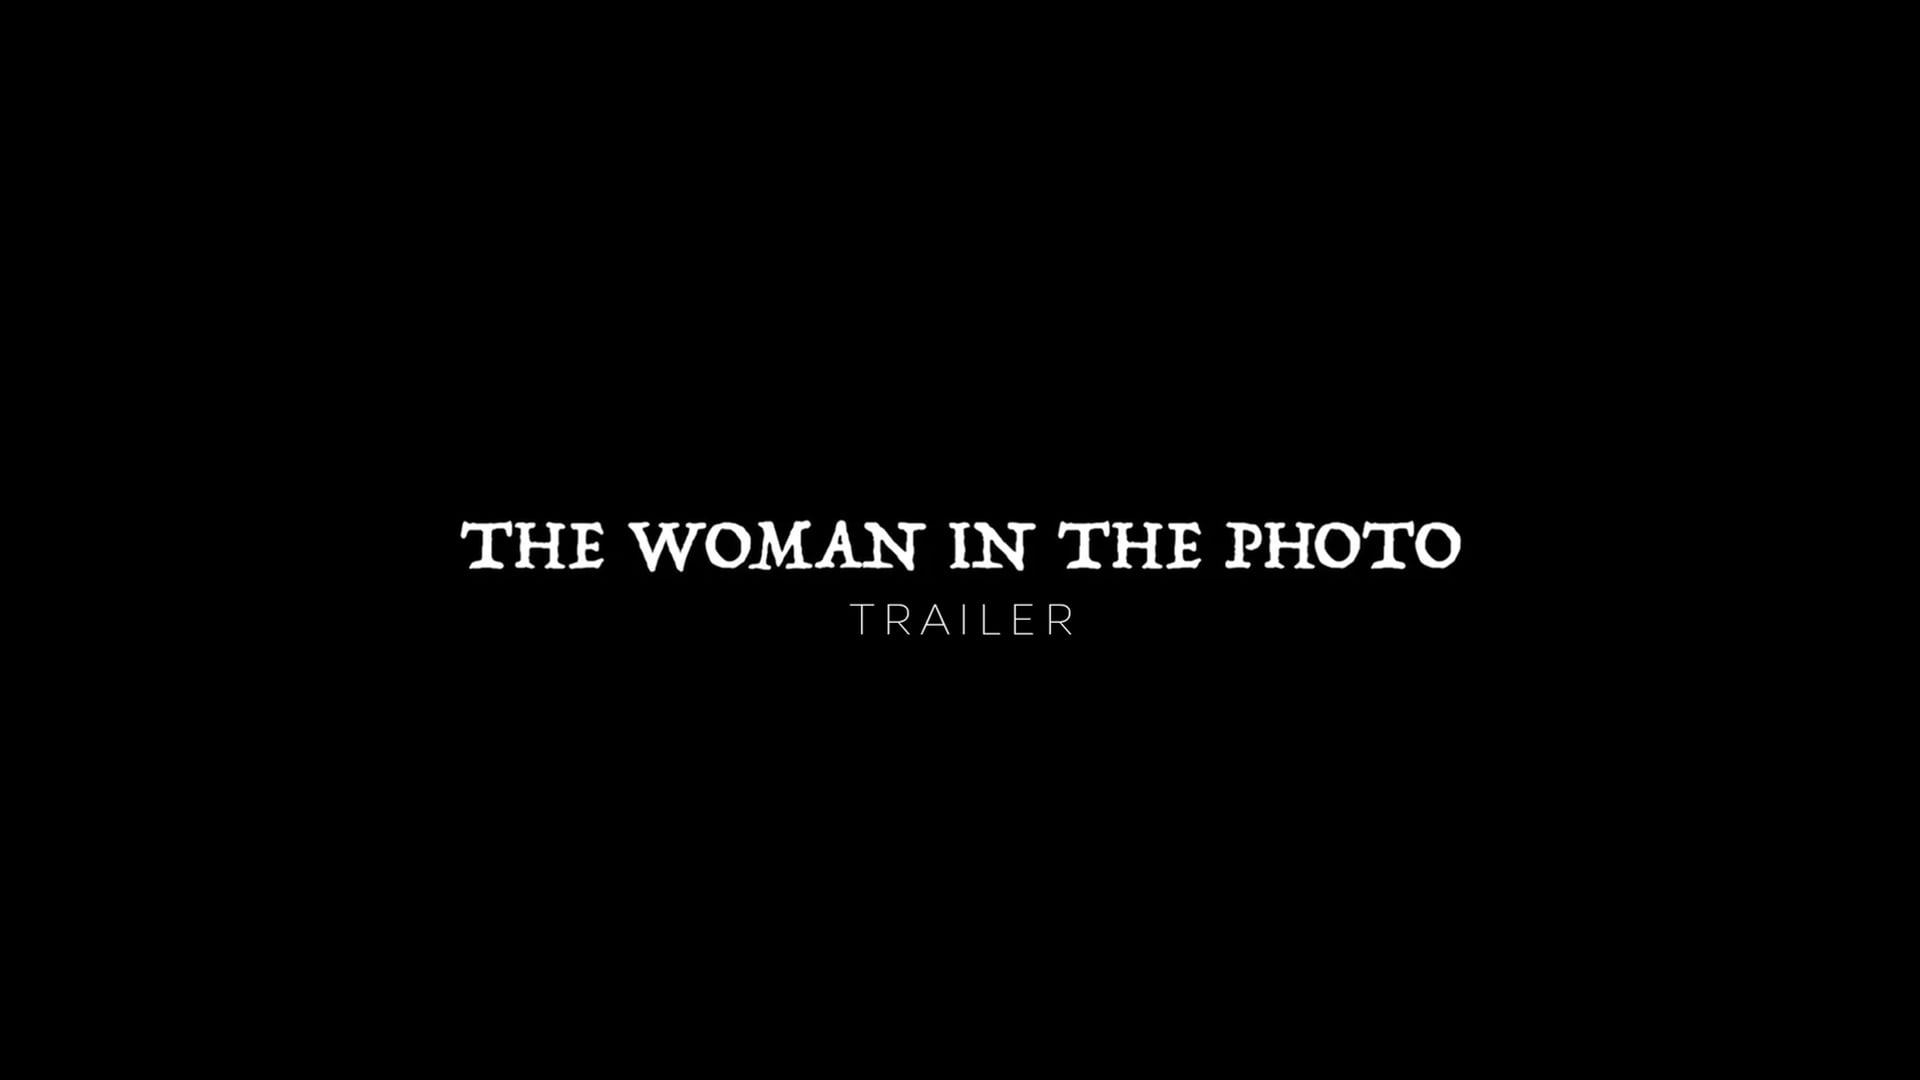 The Woman in the Photo Trailer